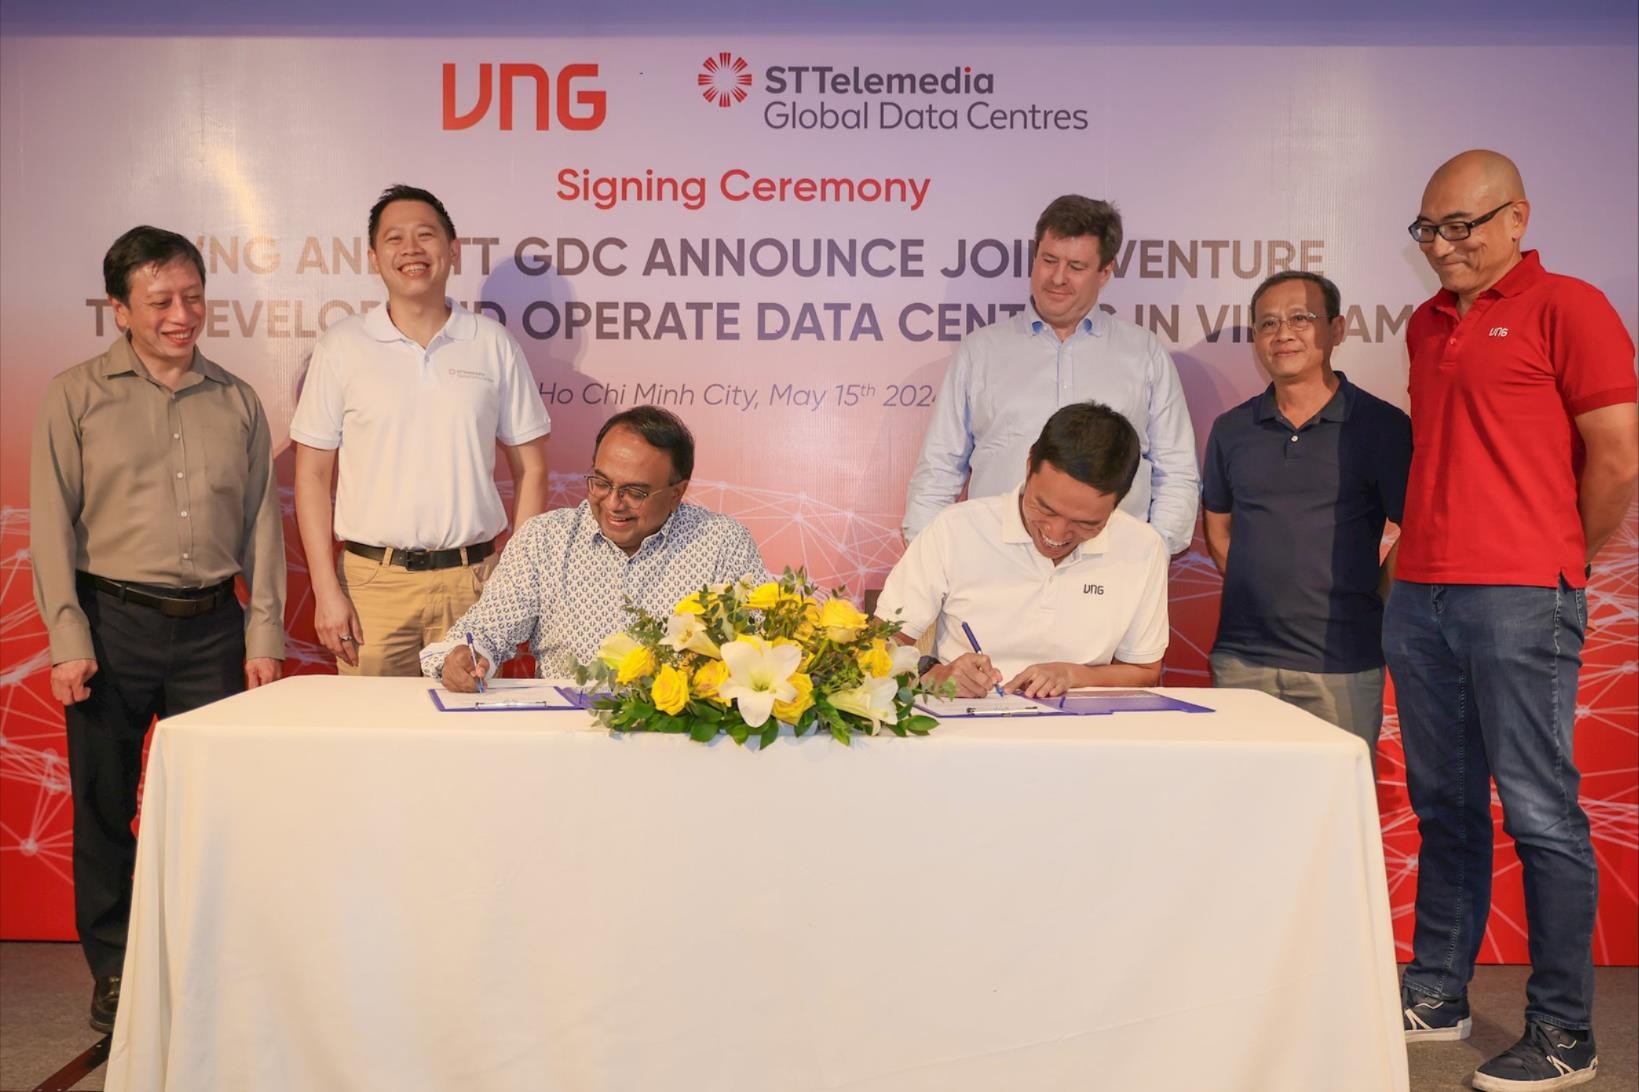 ST Telemedia and VNG launch data centre partnership